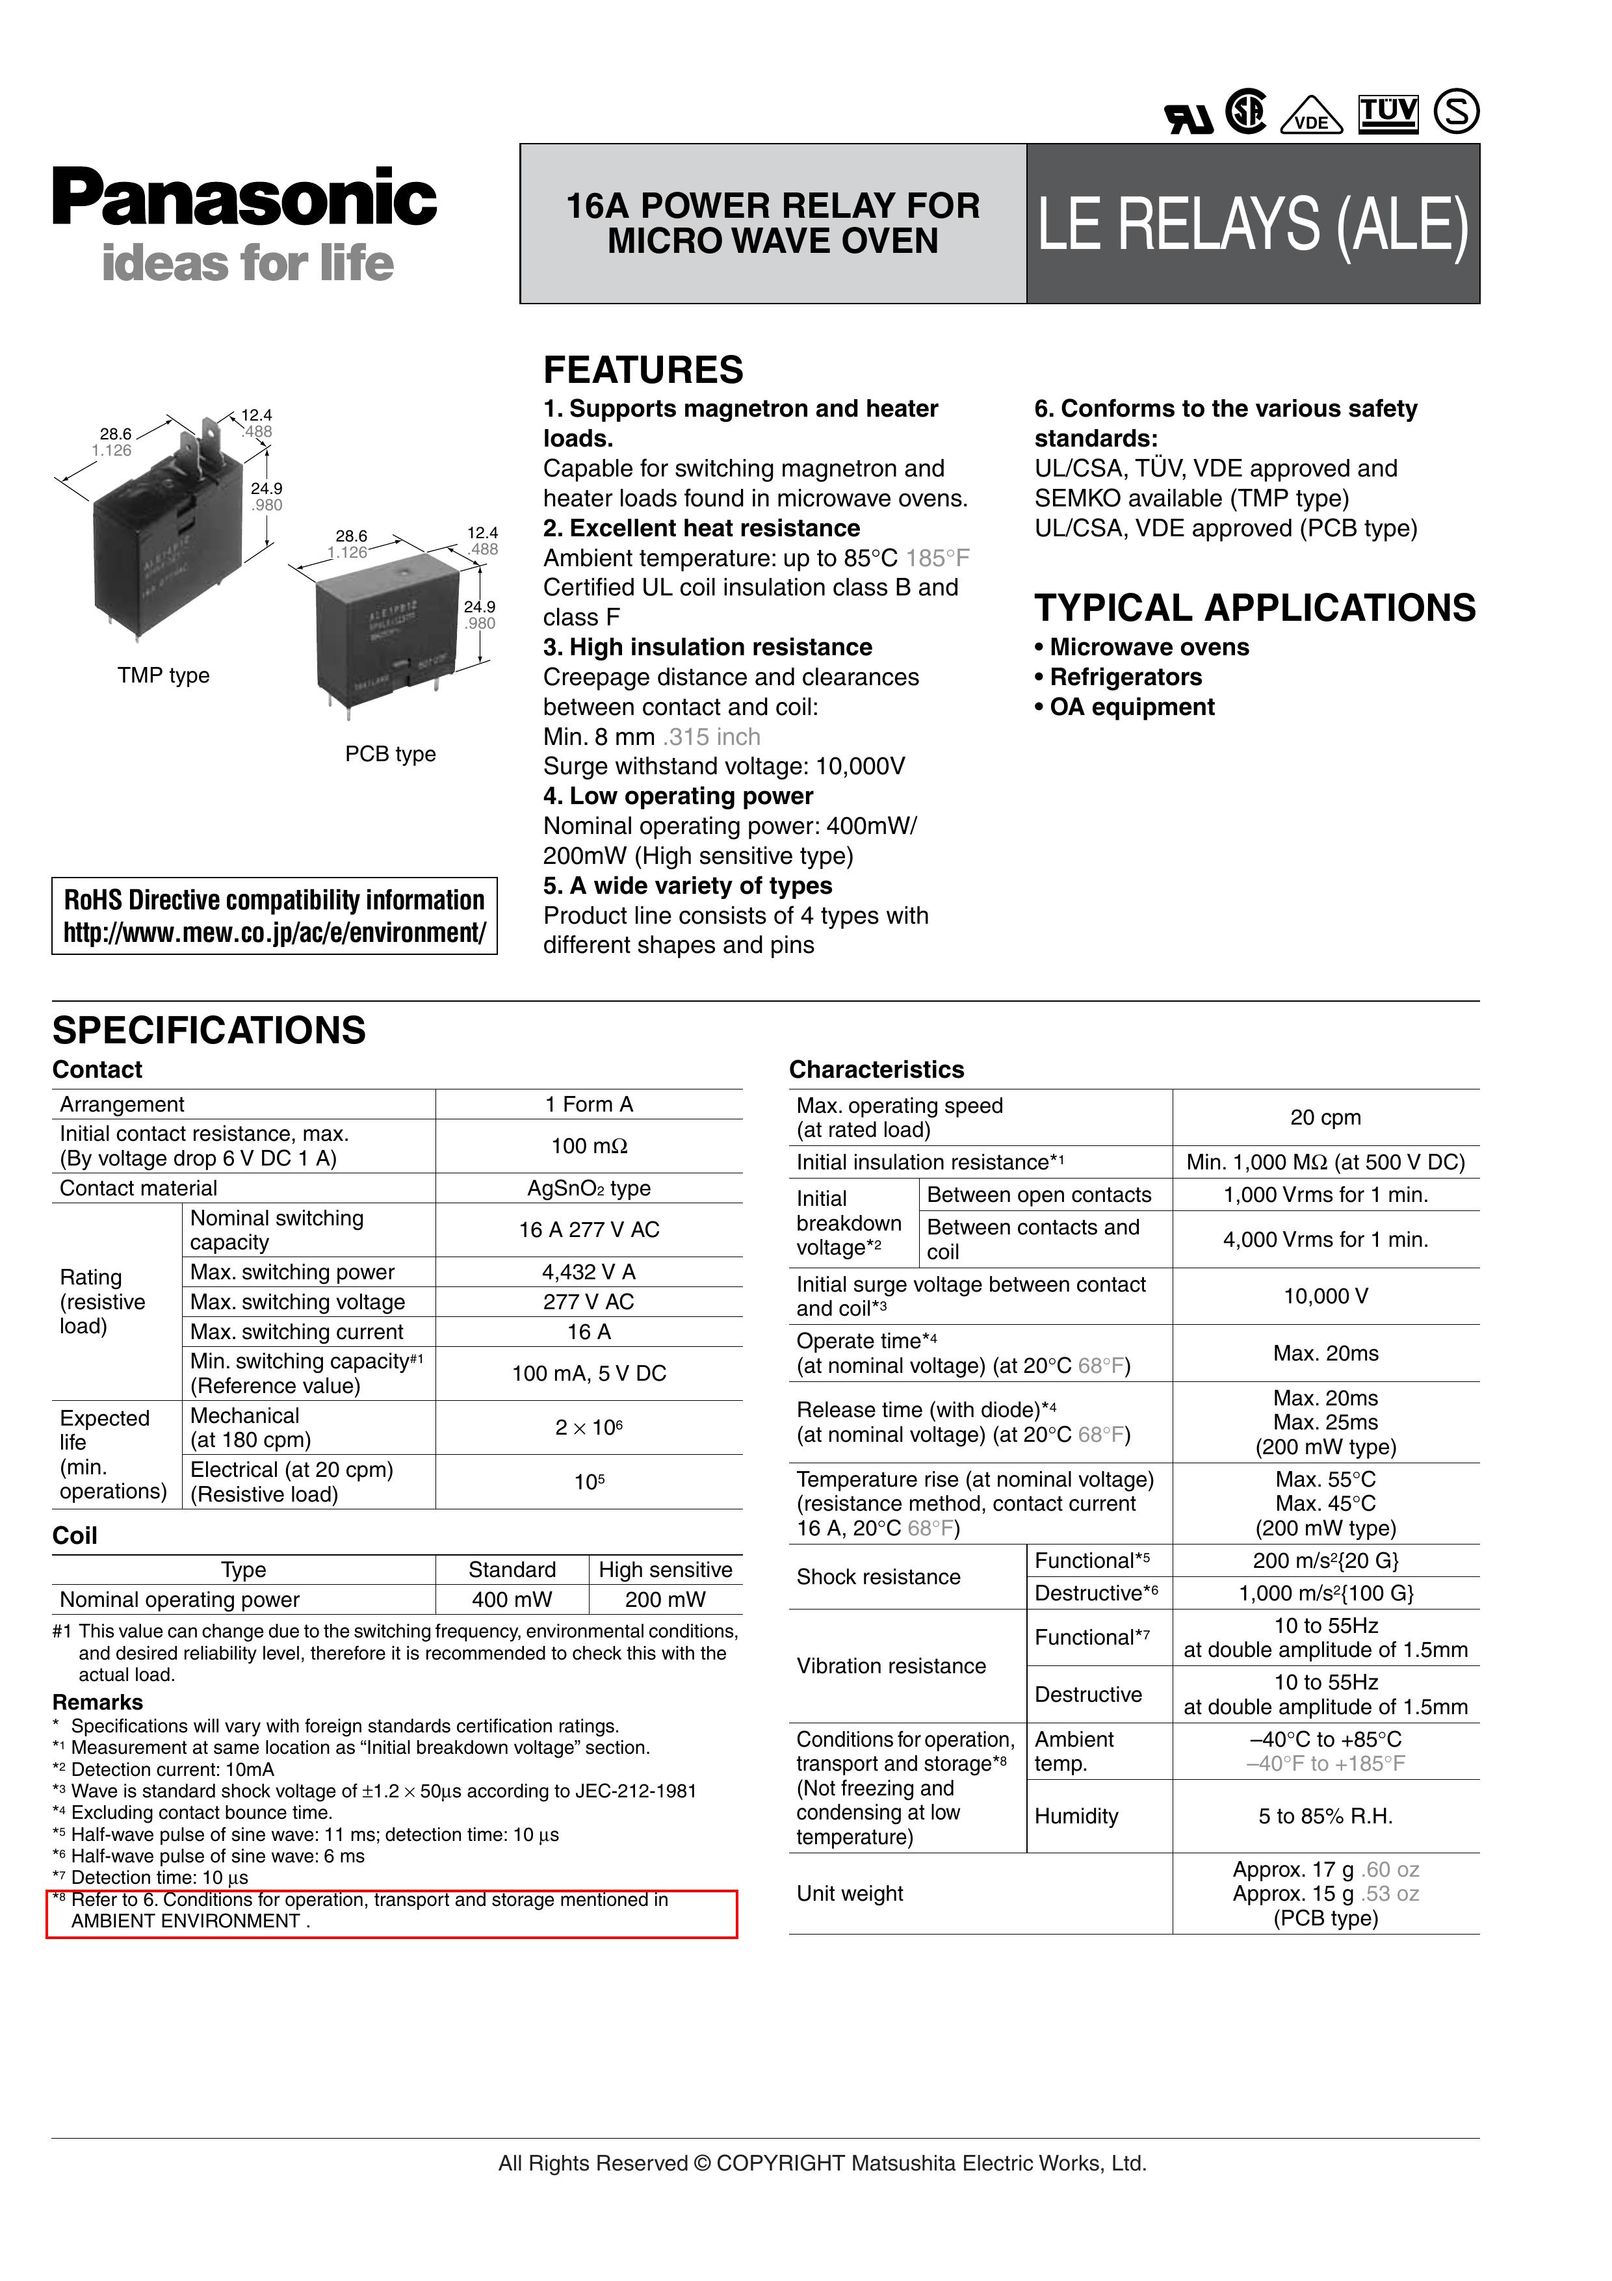 Panasonic LE Relays Microwave Oven User Manual